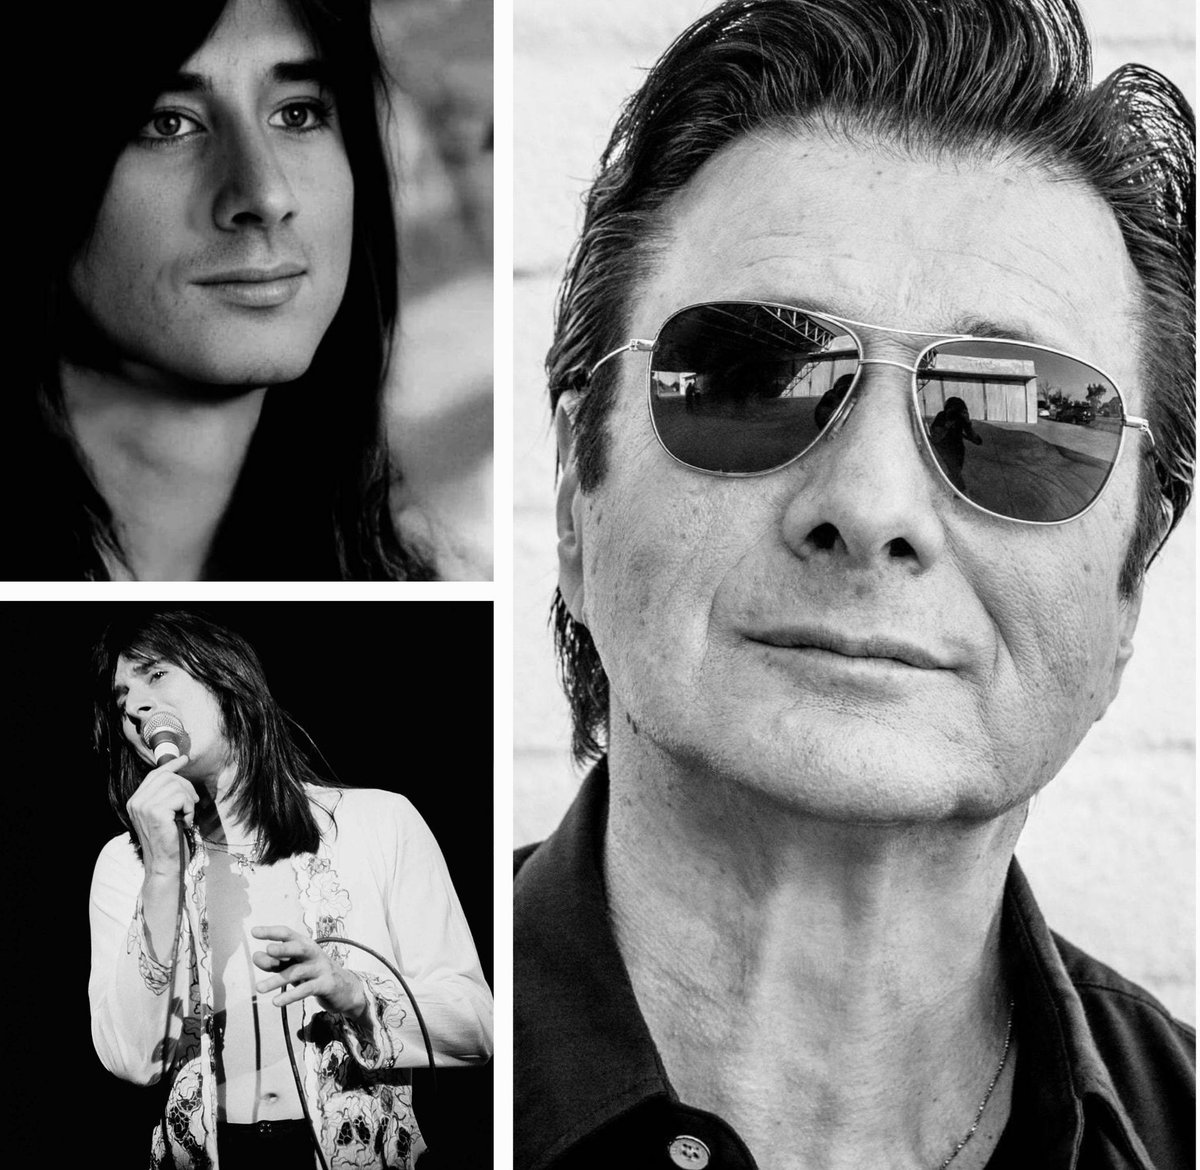 'You can't embrace your whole life if you're shut down.' 

Steve Perry